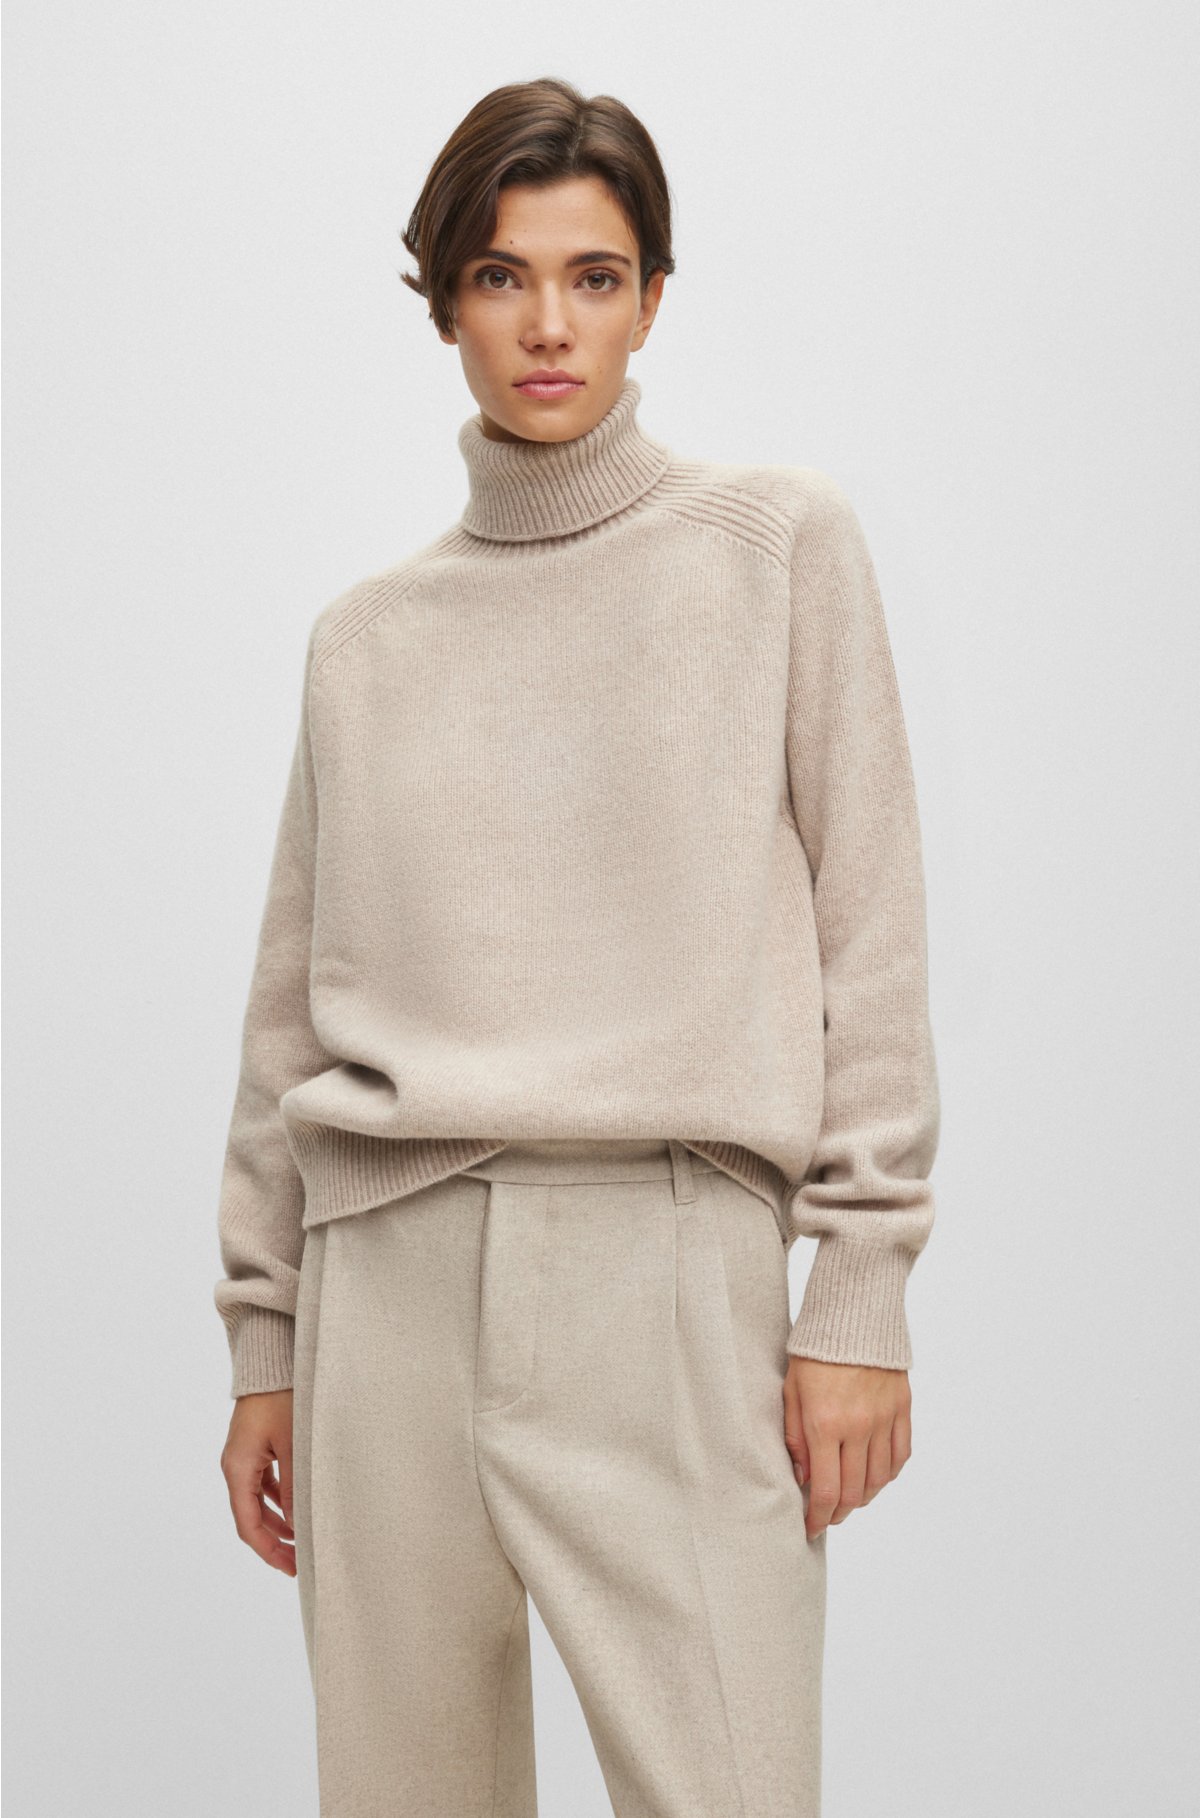 All-gender relaxed-fit sweater in virgin wool, White